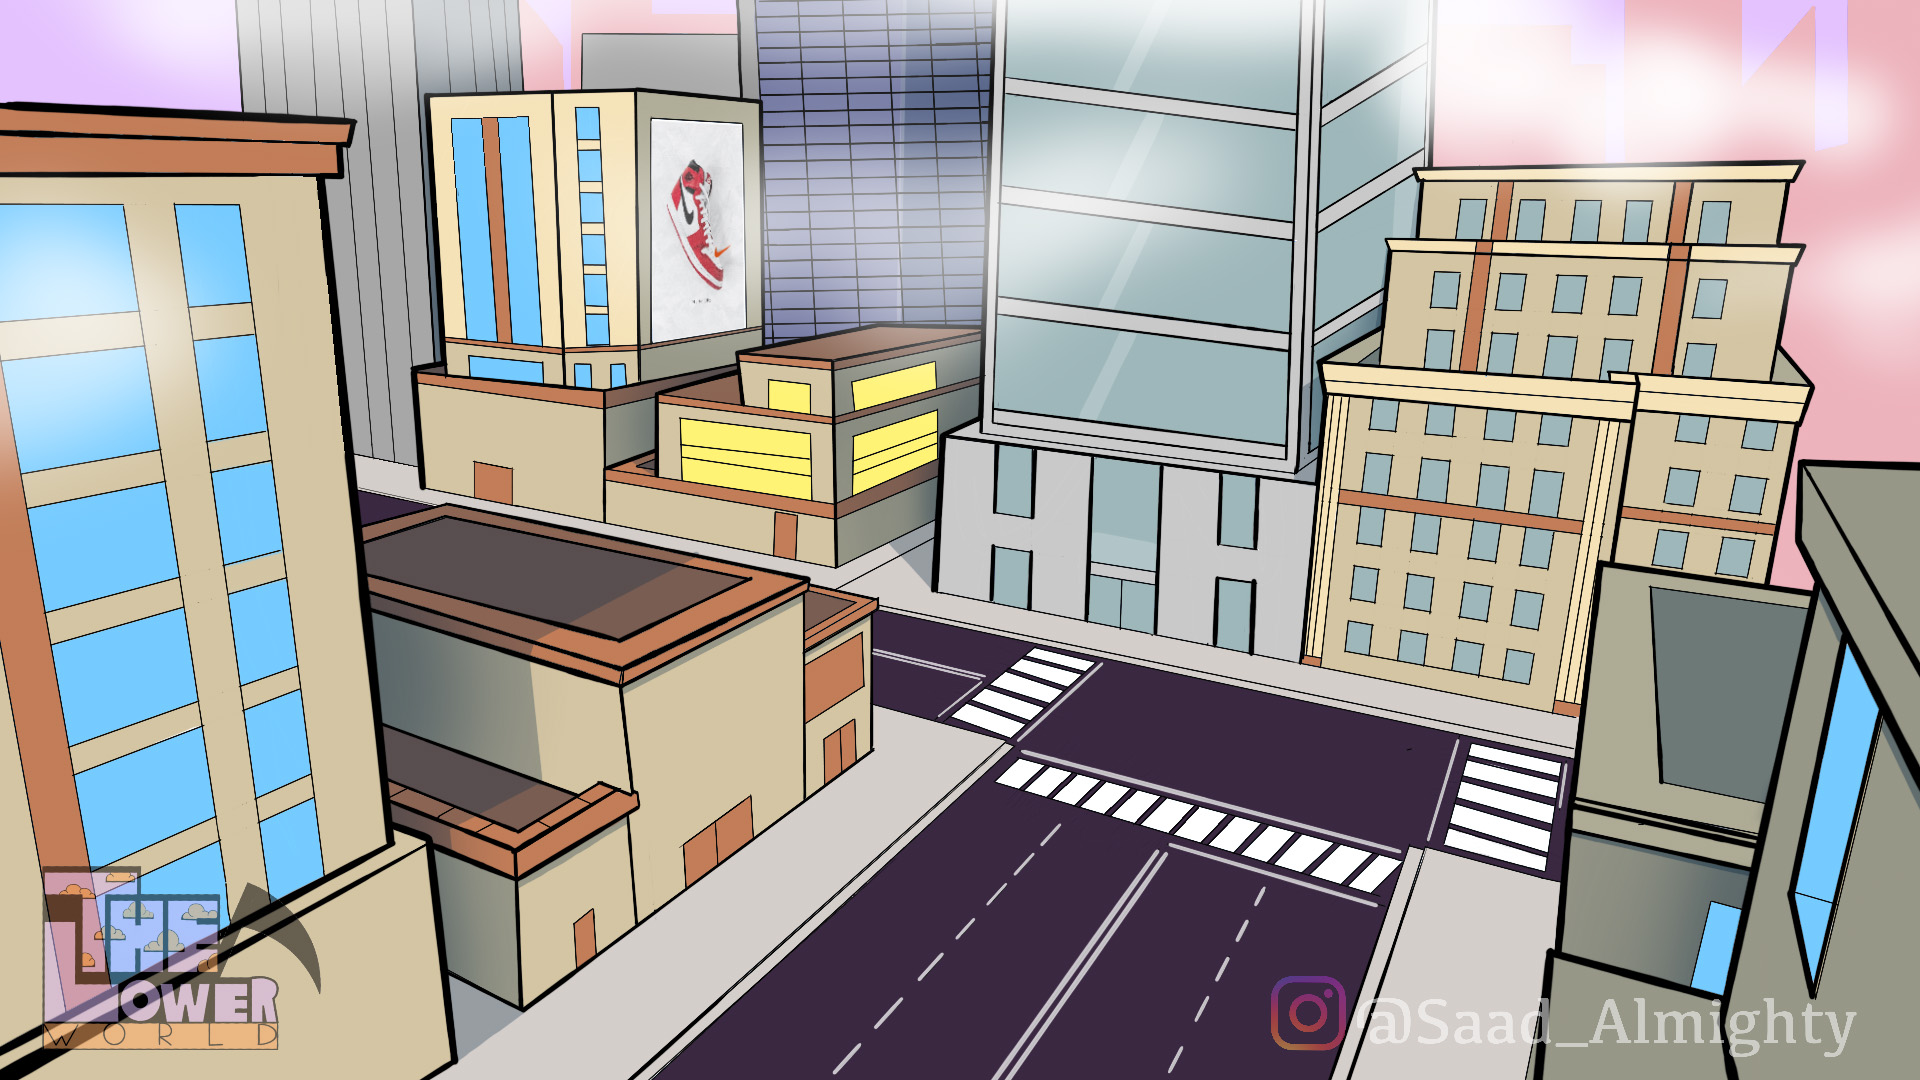 The Lower World / Still of the H.E.L. Building concept design from "The Lower World," an animated episodic sitcom created using Photoshop, Callipeg, ToonBoom, and Autodesk Sketchbook.